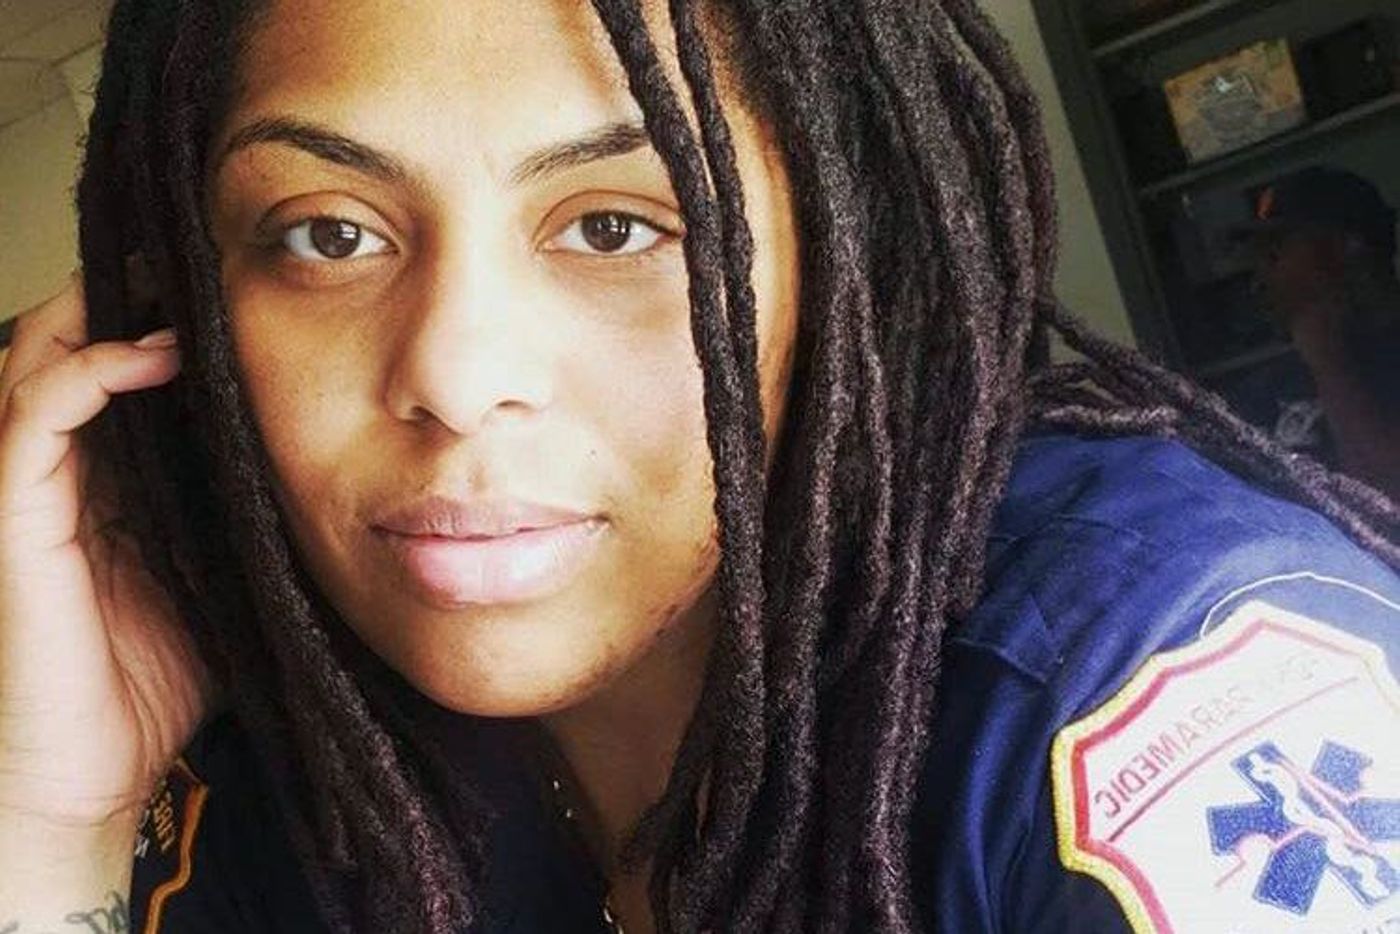 FDNY paramedic Christell Cadet has been intubated and remains in an intensive care unit.